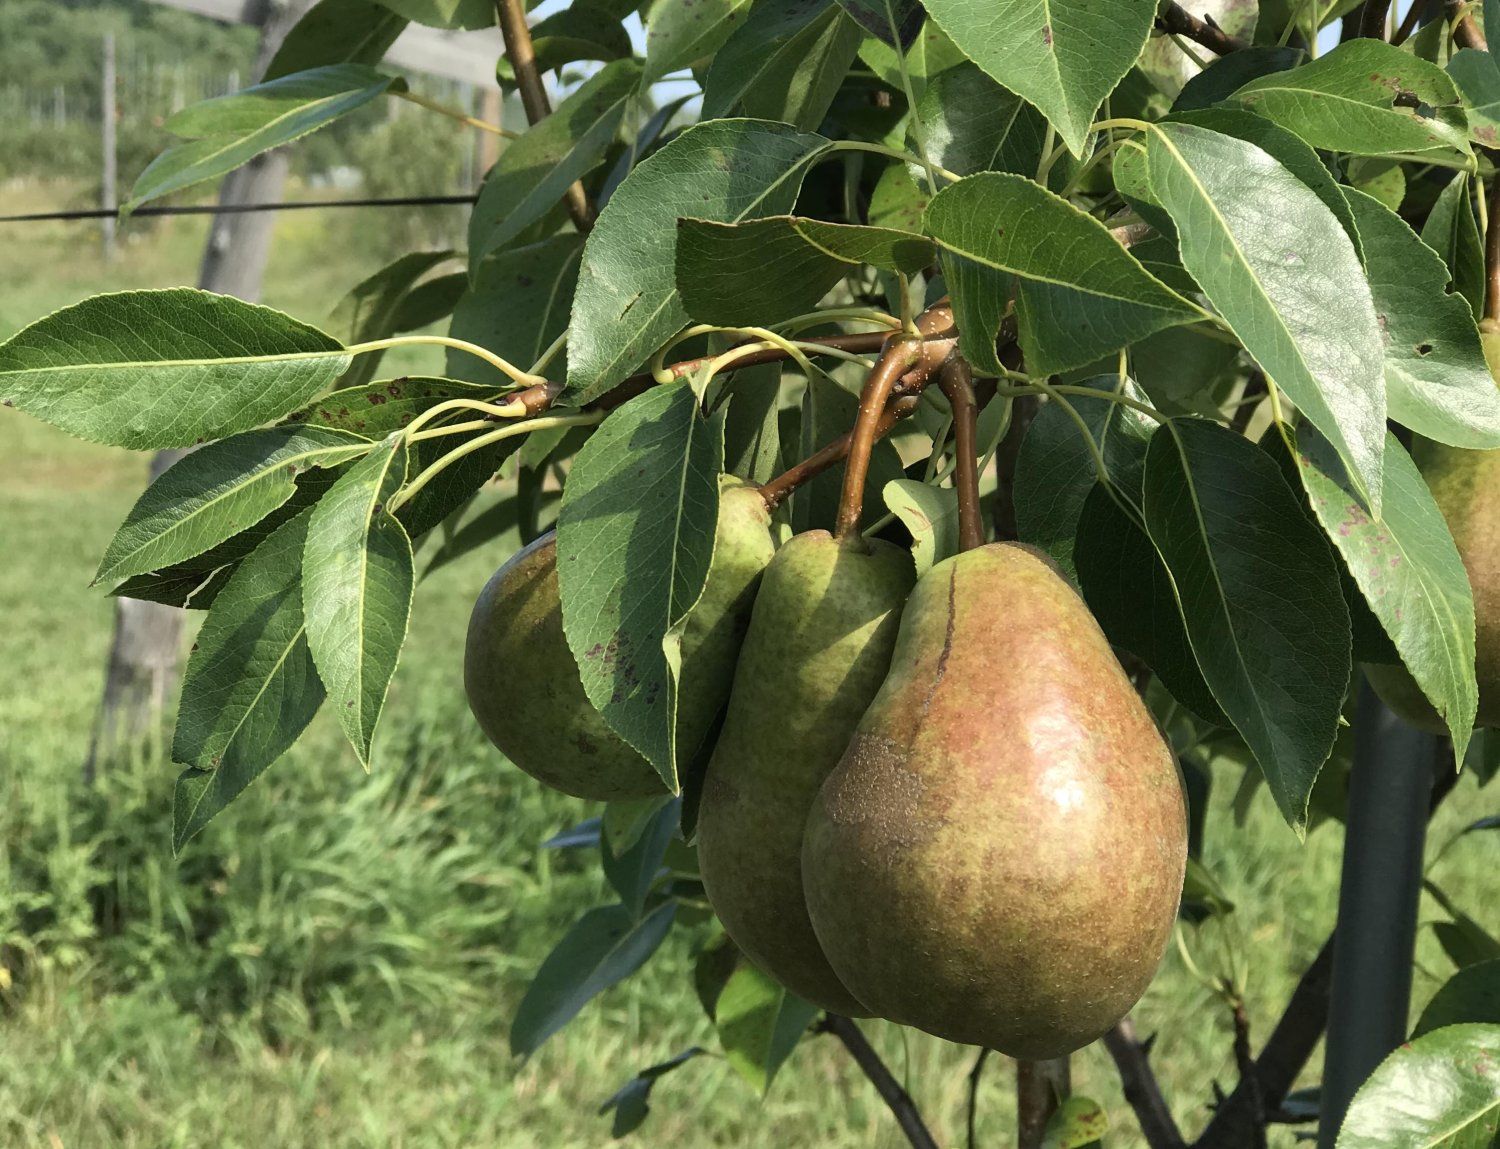 Previous Happening: All About Pears at Bayfield Apple Company